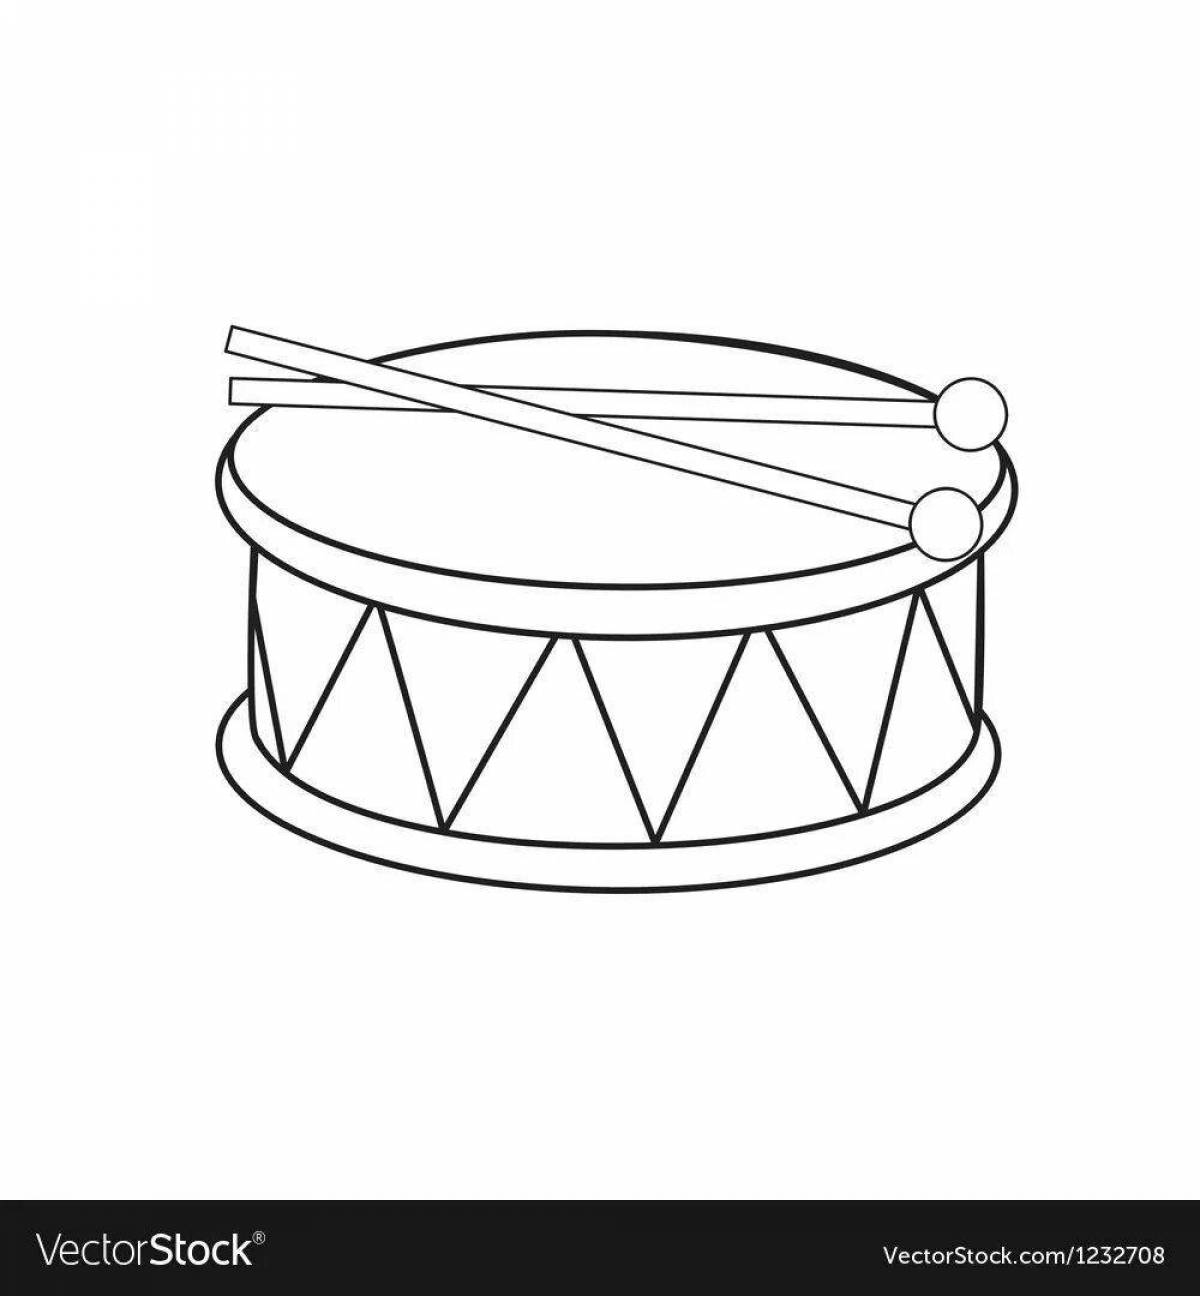 Coloring book glowing drum musical instrument